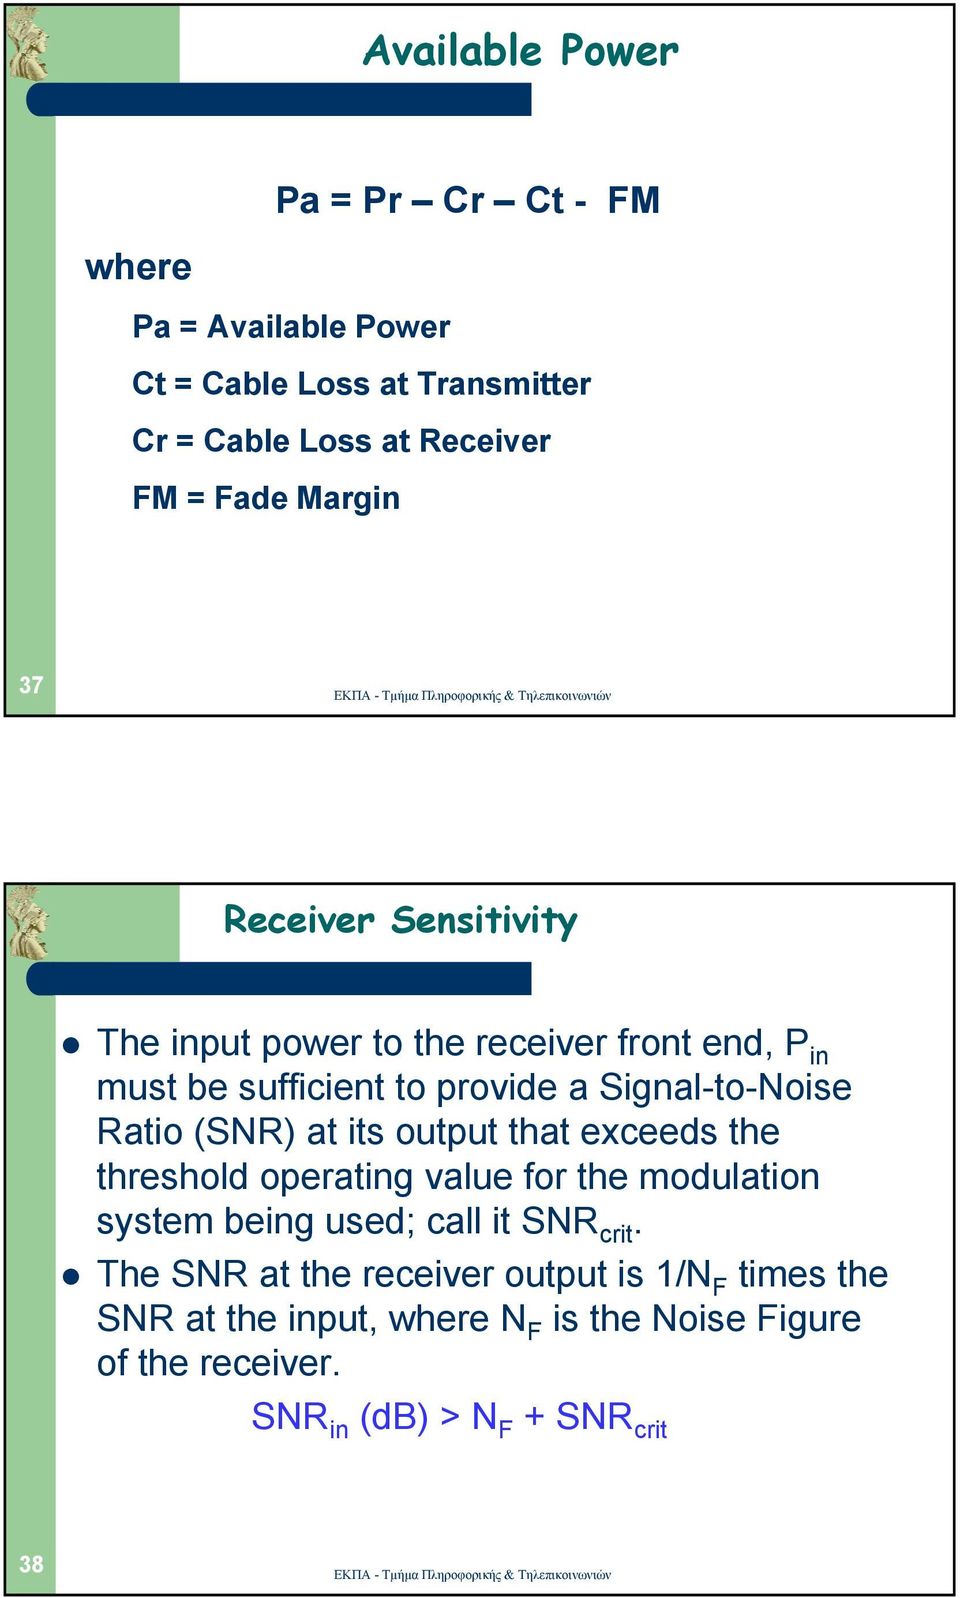 (SNR) at its output that exceeds the threshold operating value for the modulation system being used; call it SNR crit.